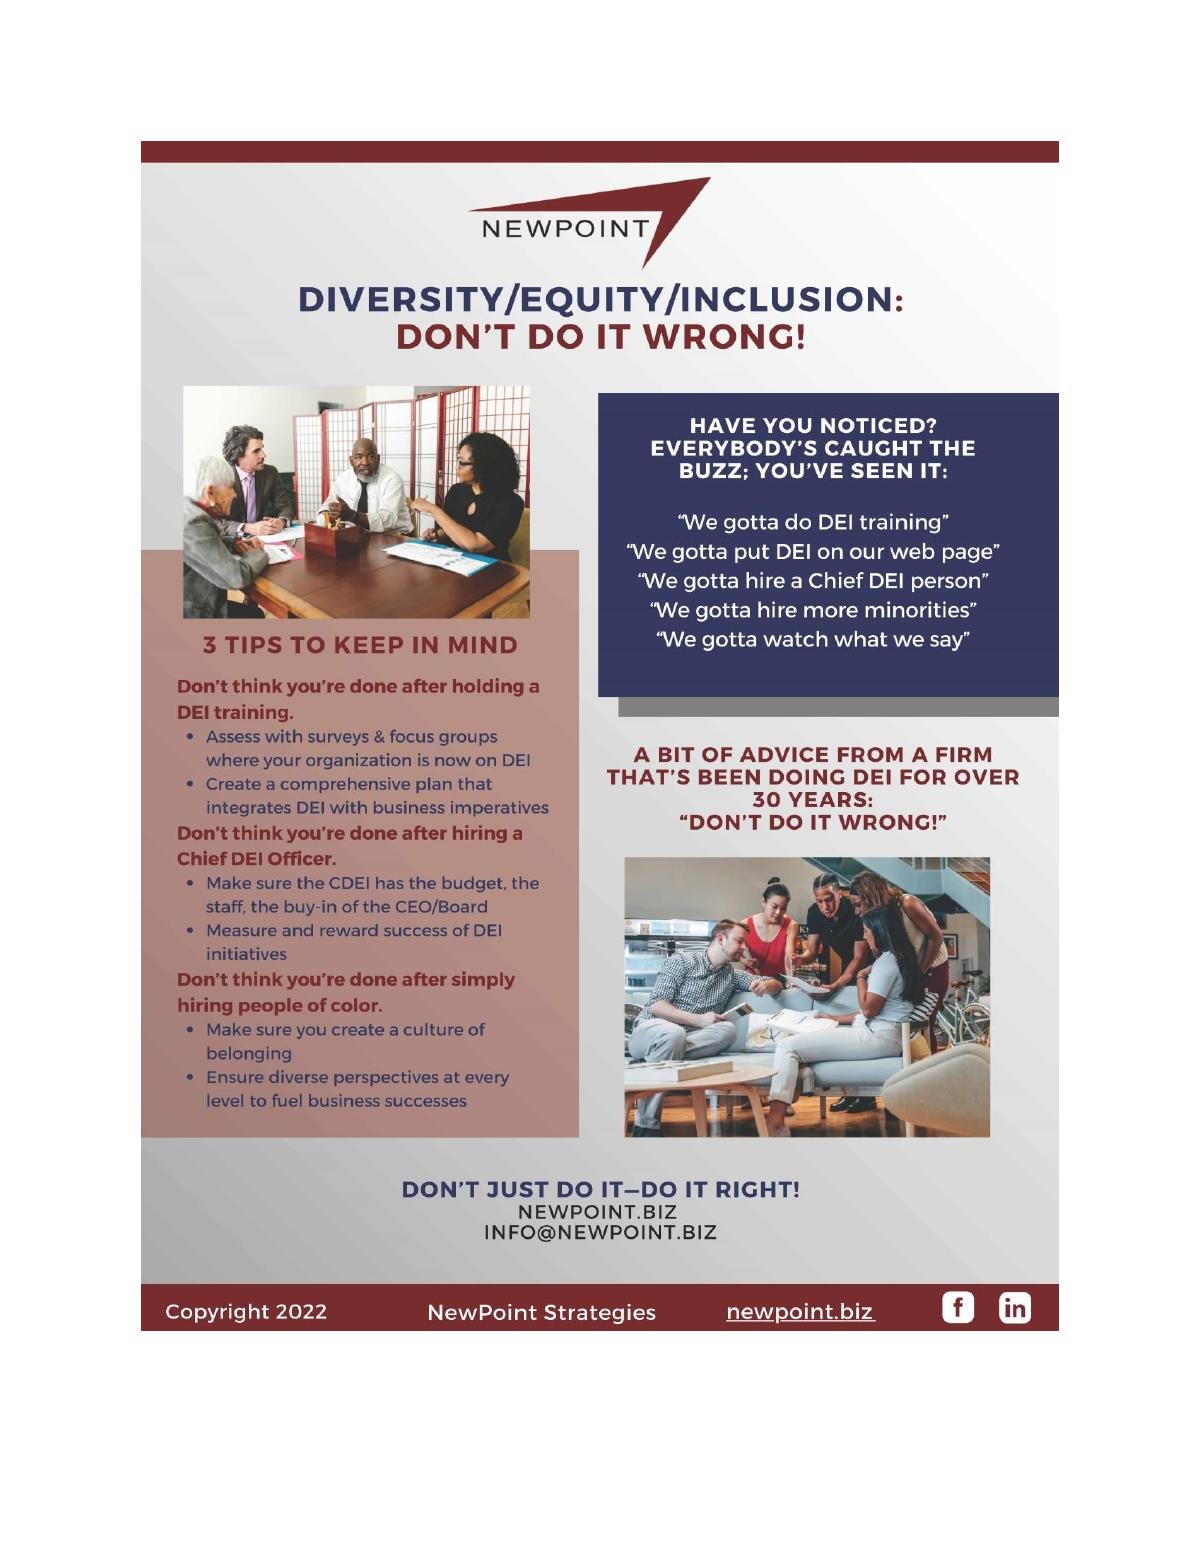 Diversity/Equity/Inclusion: Don't Do It Wrong!